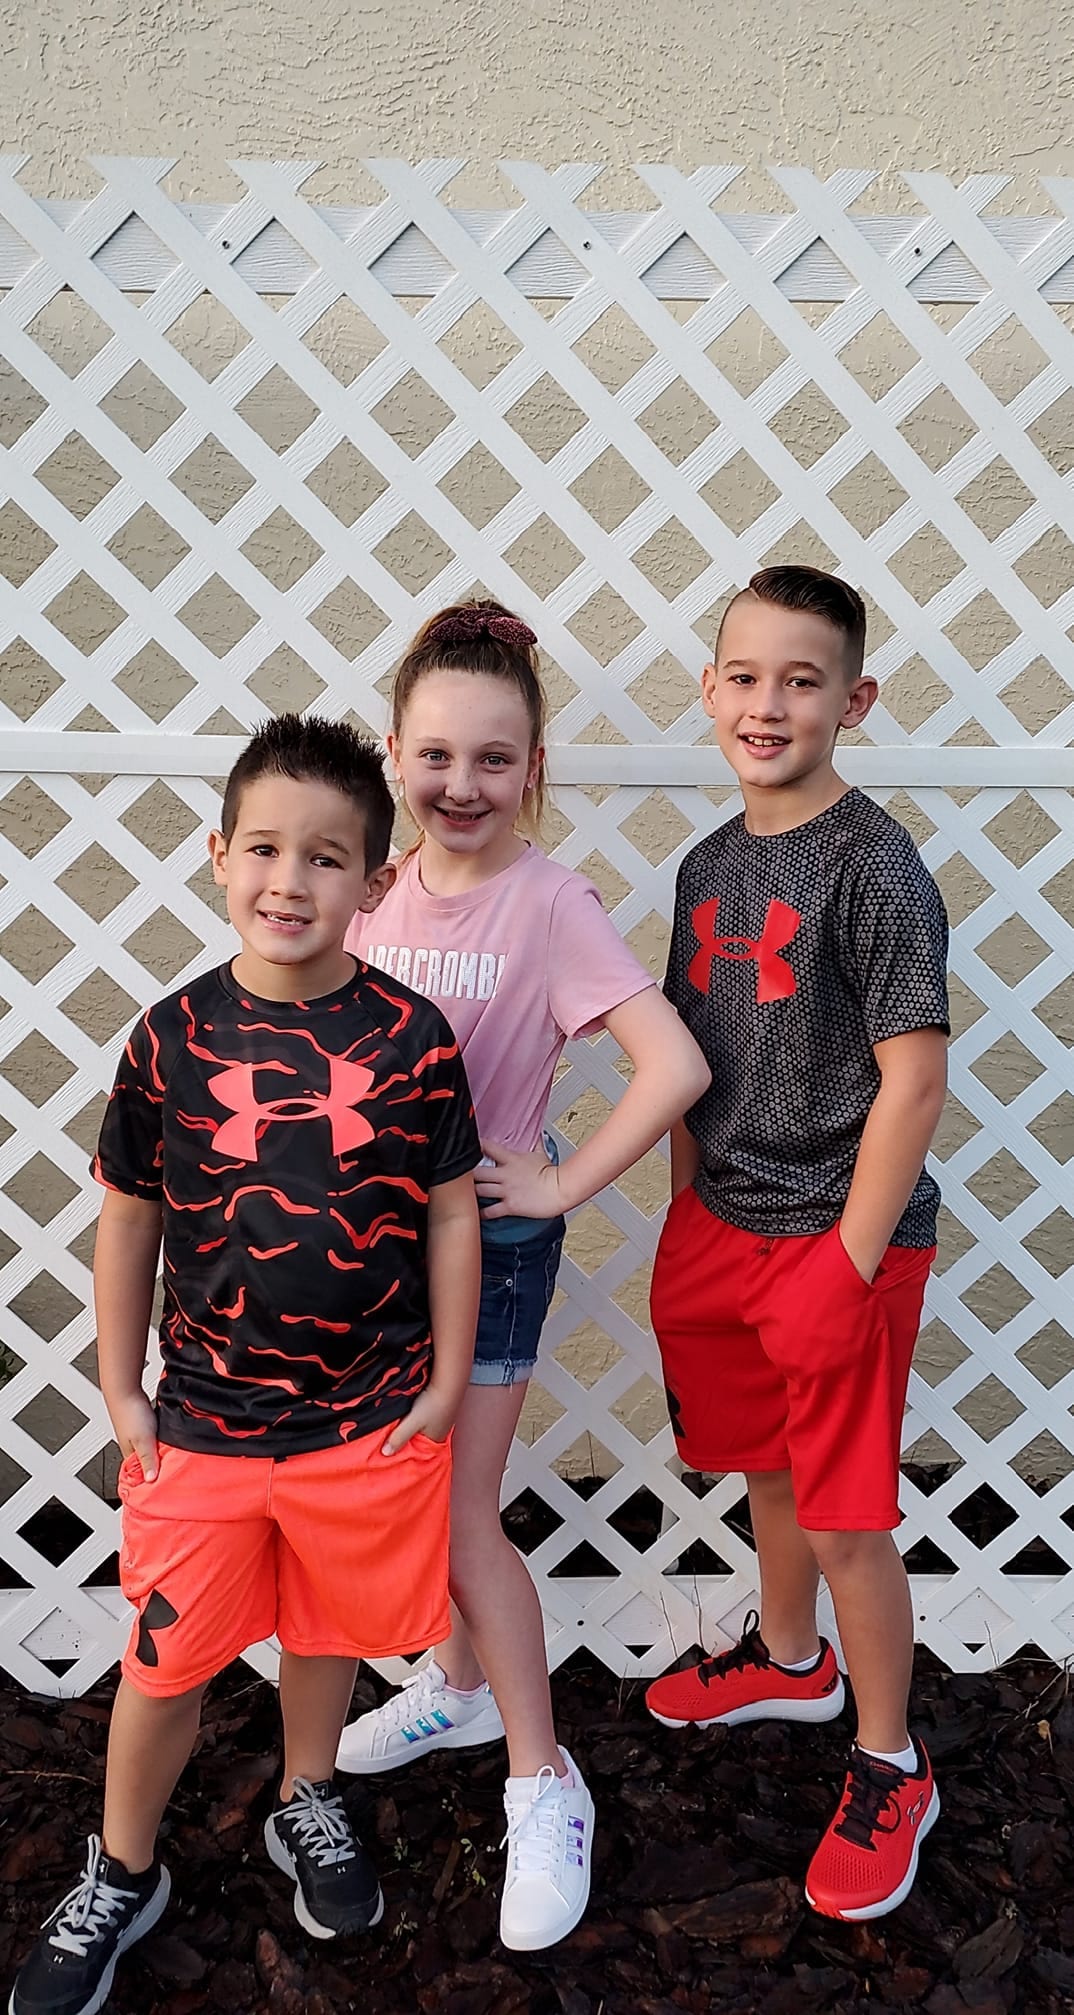 “Lynken, Kynslee and Ledger's first day at Bailey Elementary. Excited about finally seeing friends again!!” — Kaley West